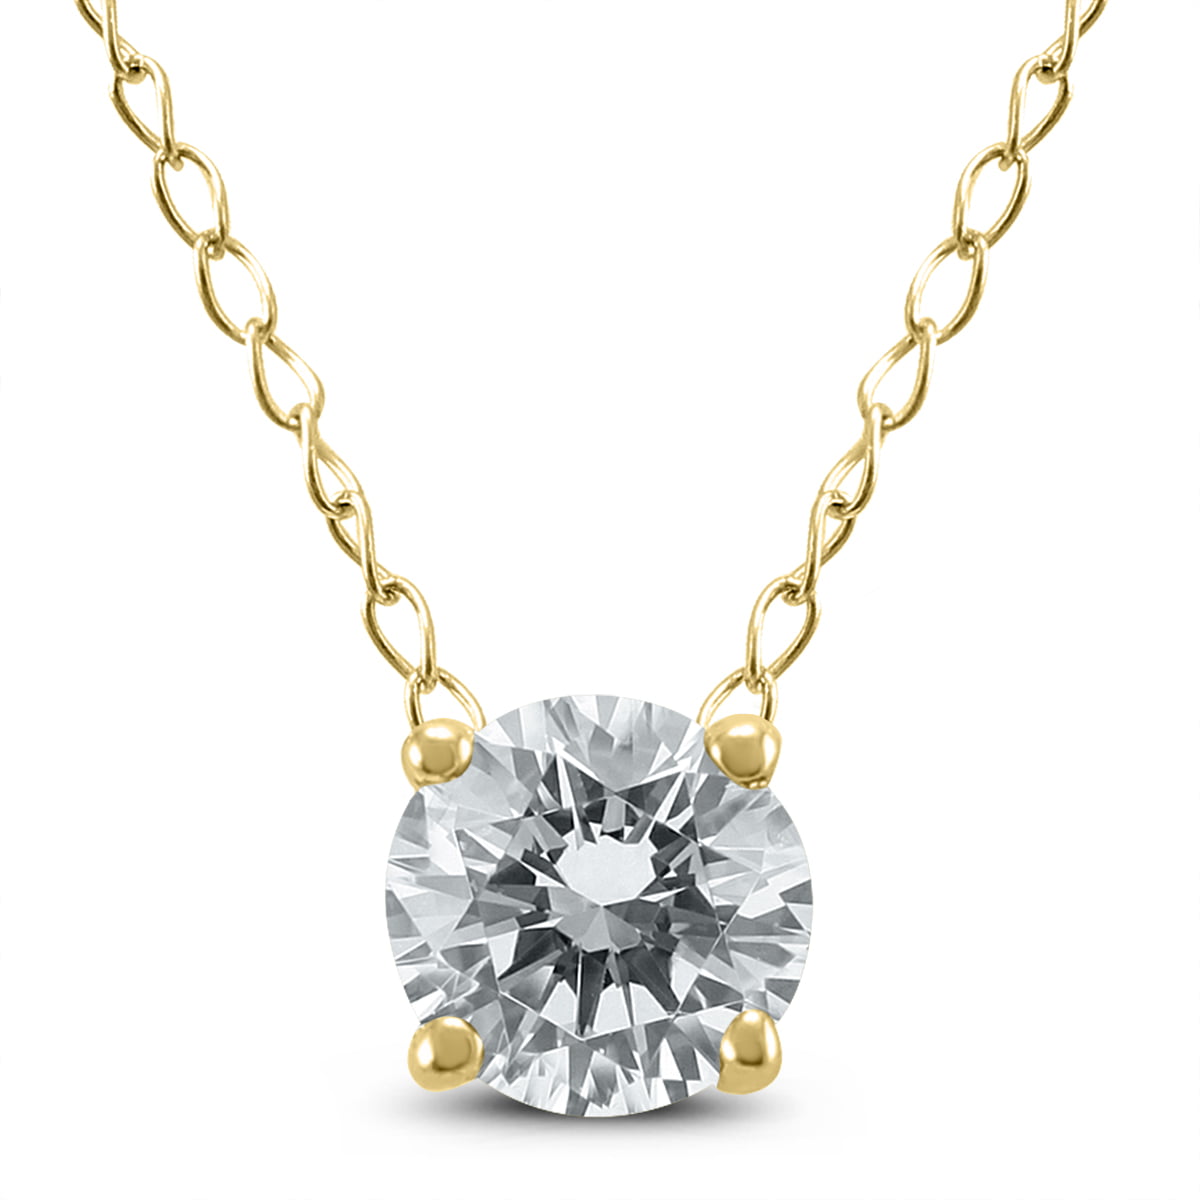 Szul Jewelry 1/4 Carat Floating Round Diamond Solitaire Necklace in 14K Yellow Gold (JKL